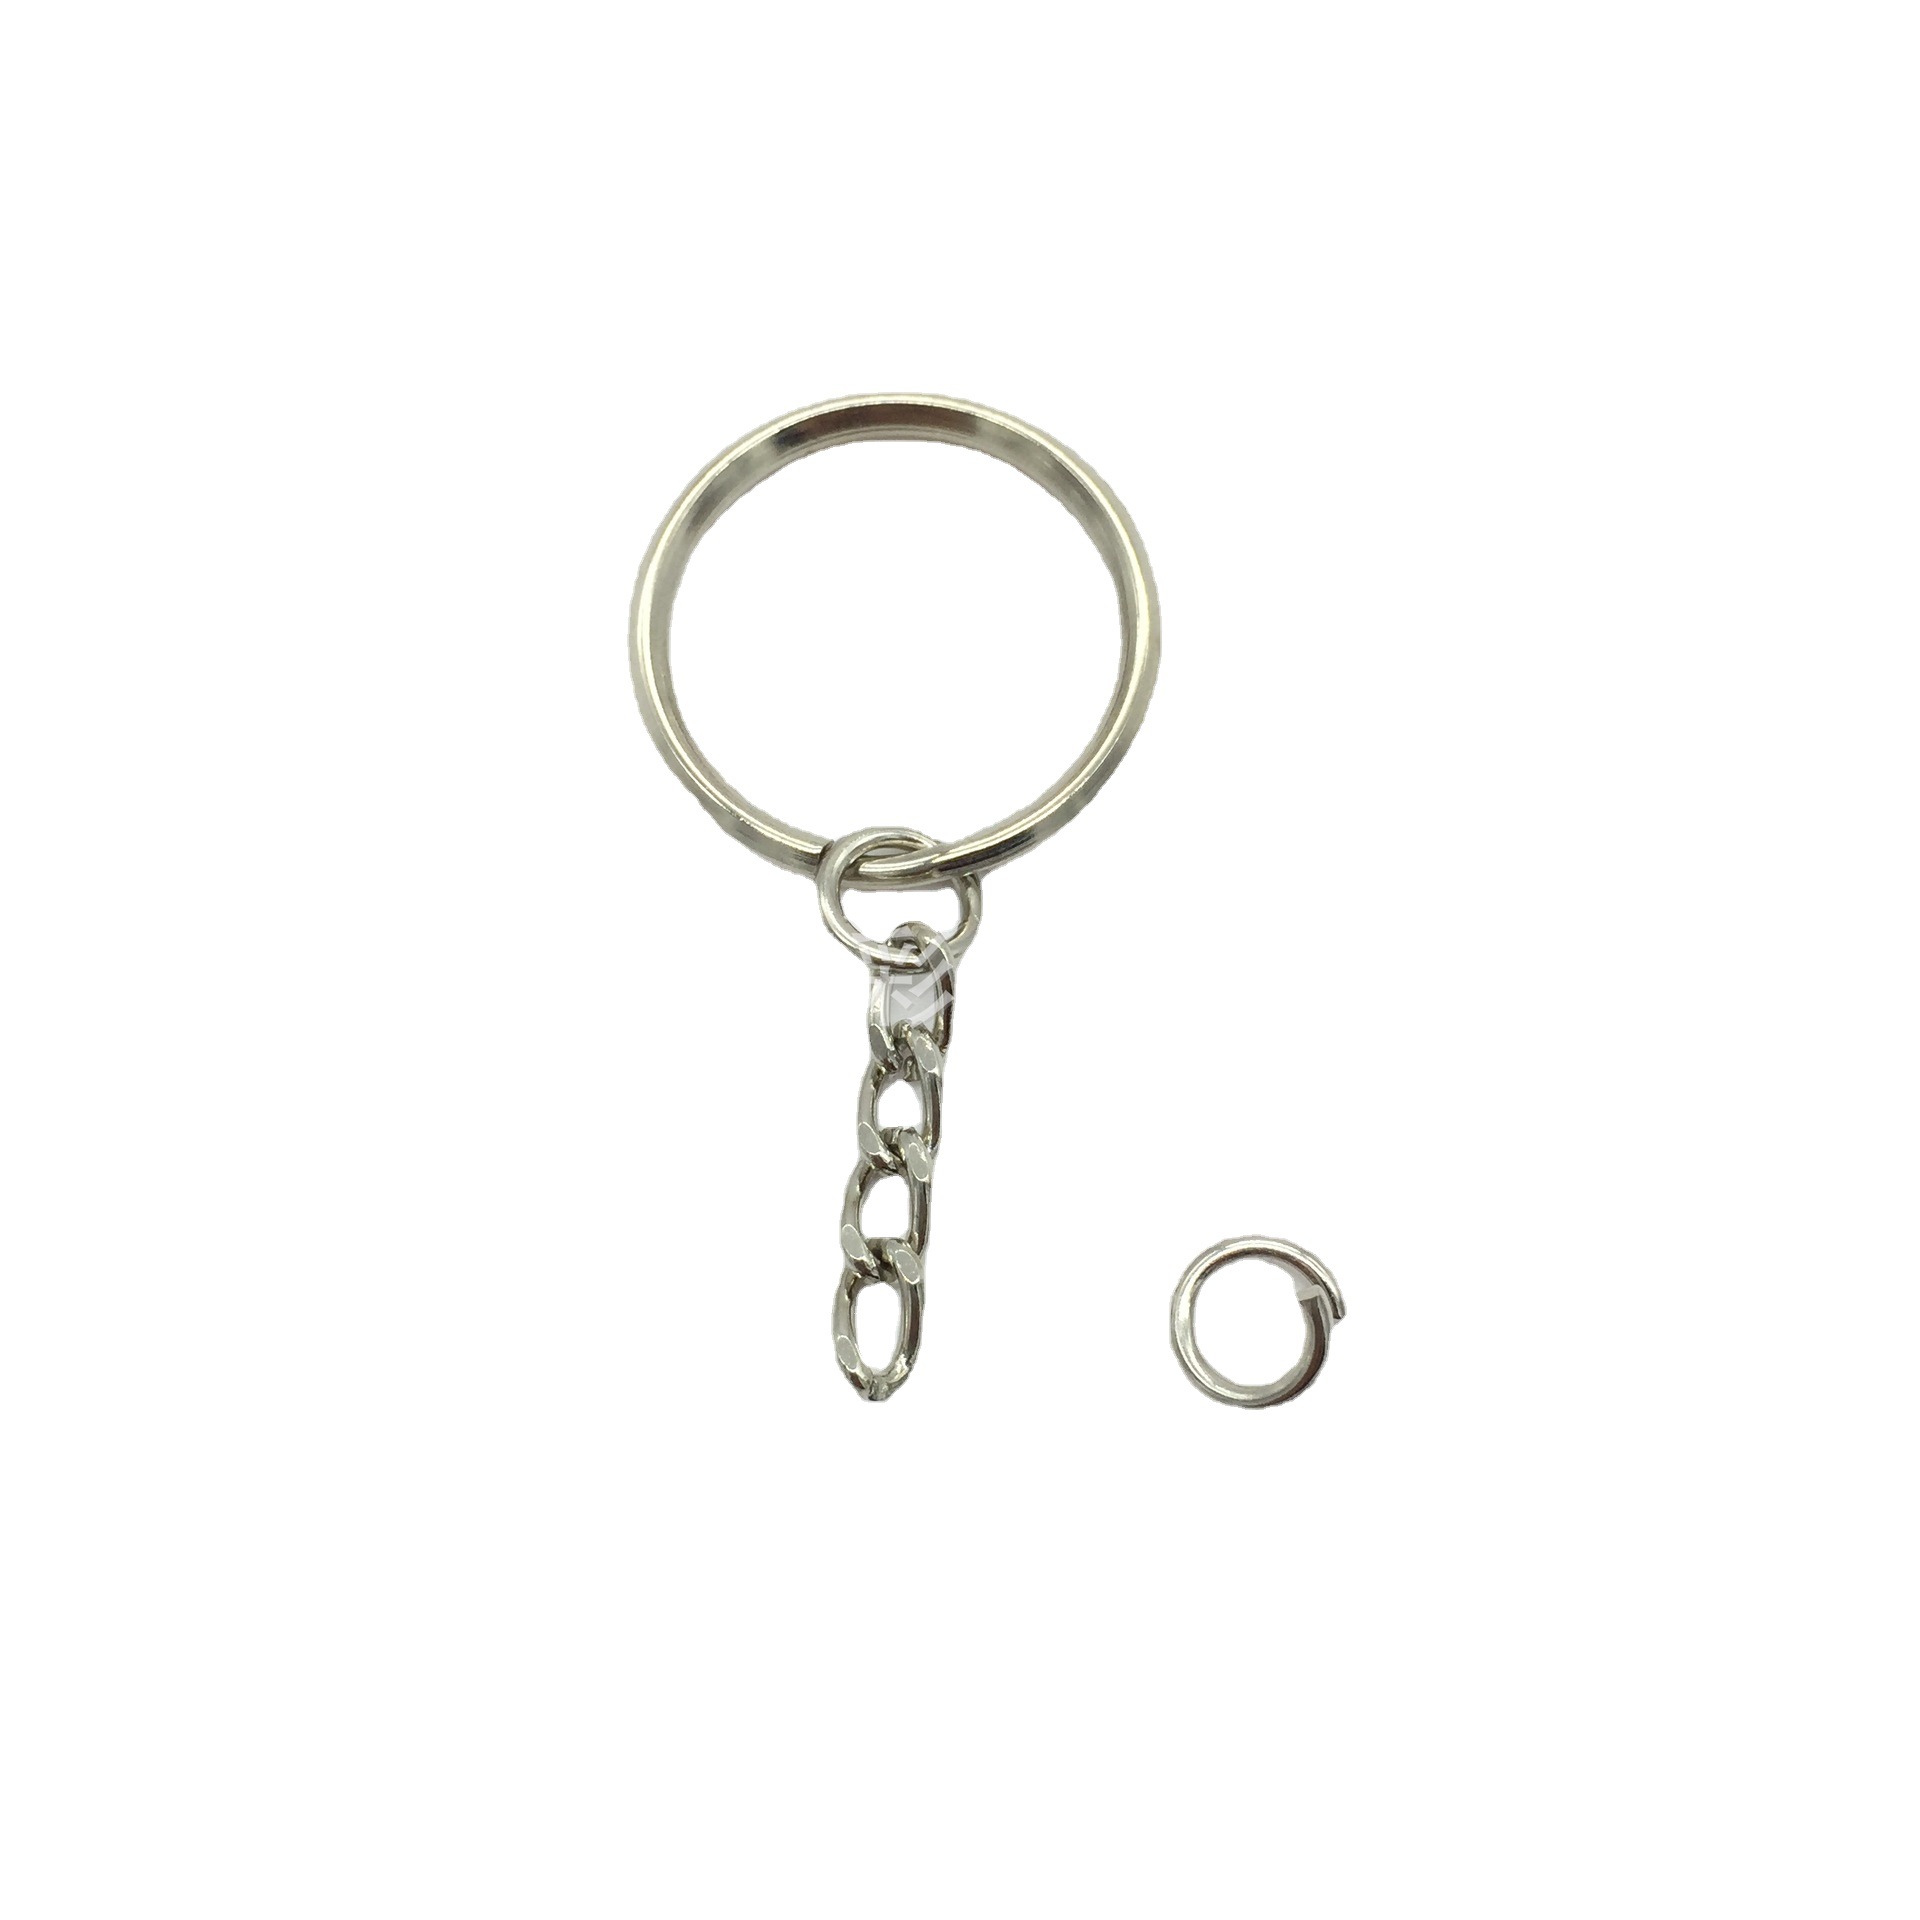 Dongguan Manufacturers Supply All Kinds of Key Ring with Chain Key Chain Aperture with Chain